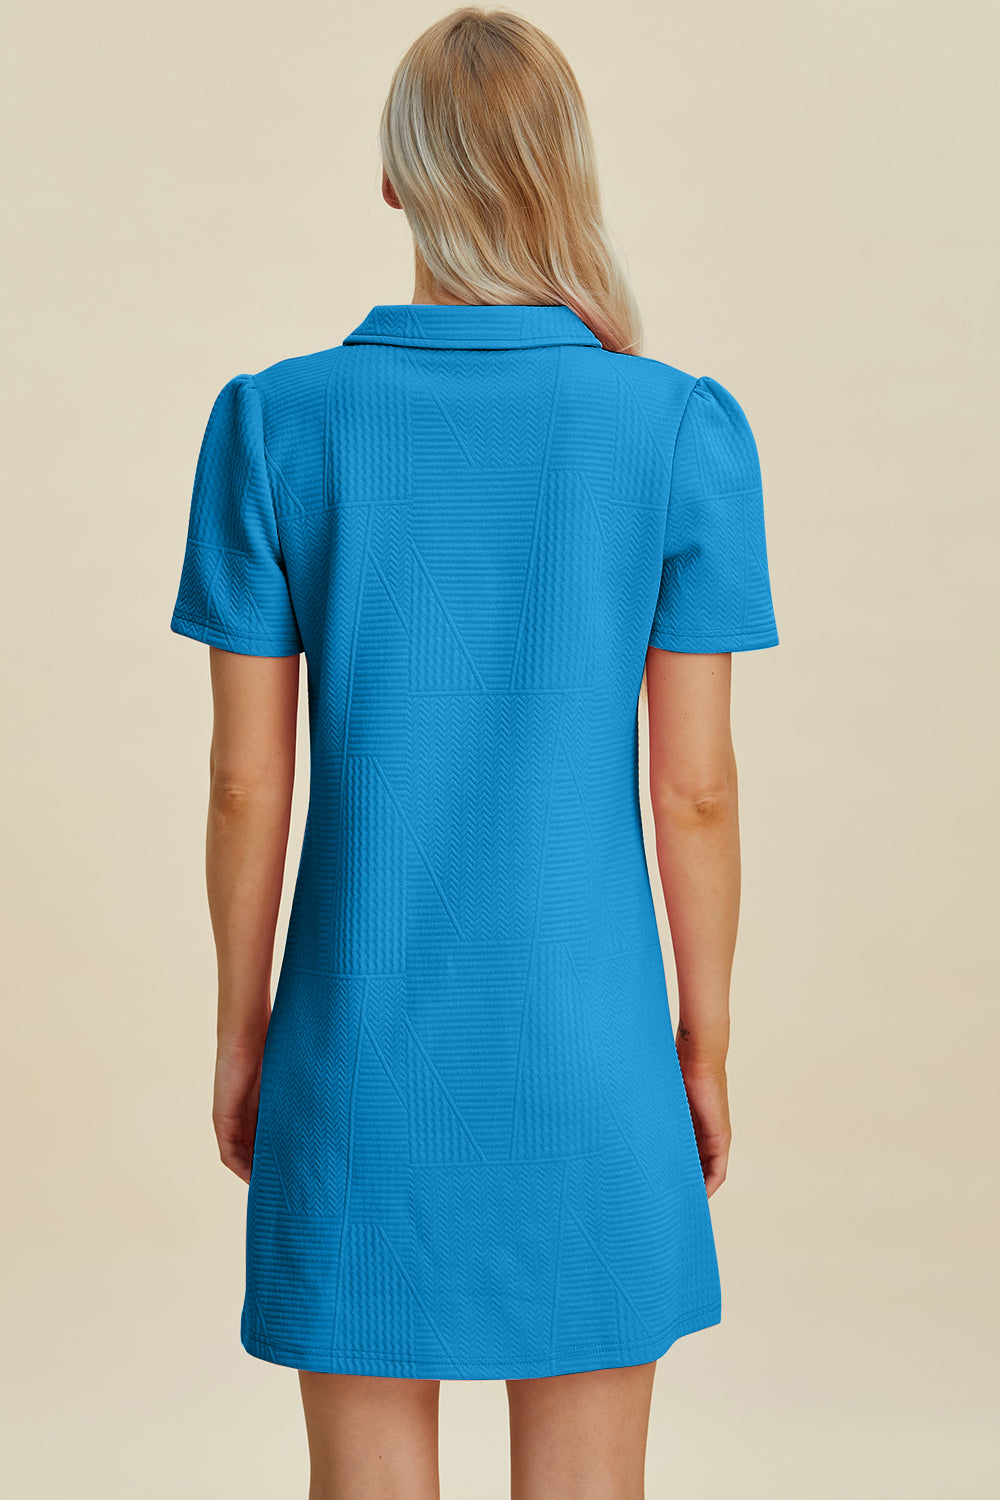 Blue textured dress, perfect for casual and office wear